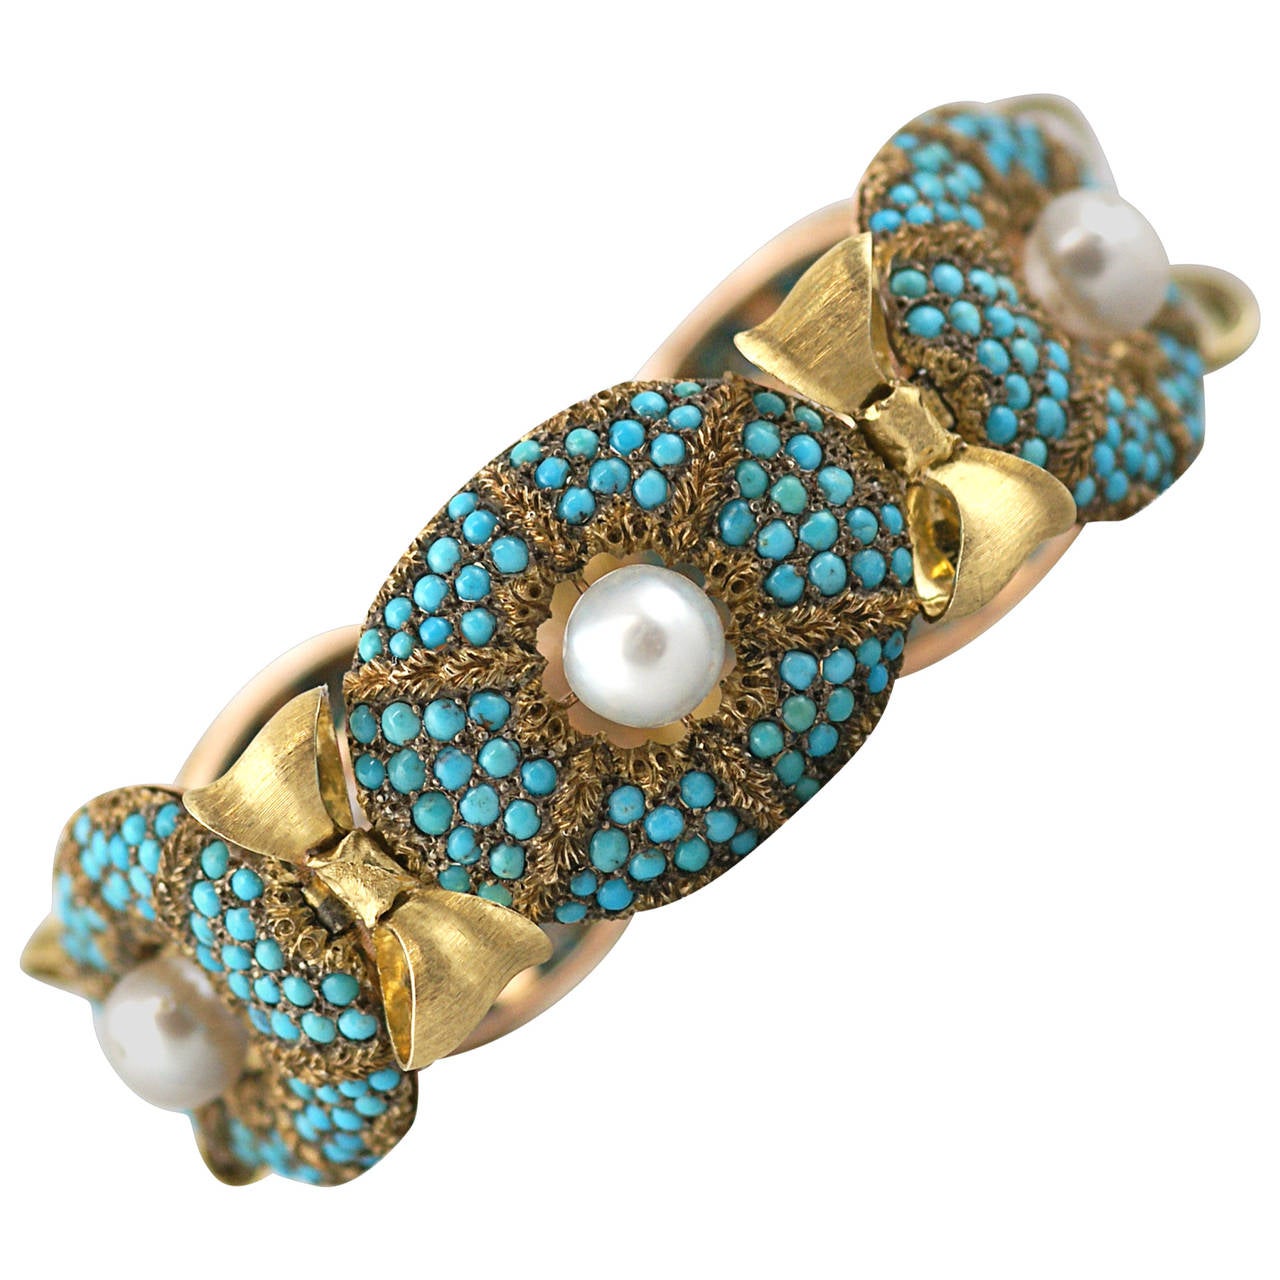 1955 Buccellati Turquoise Pearl Gold Bow Bracelet